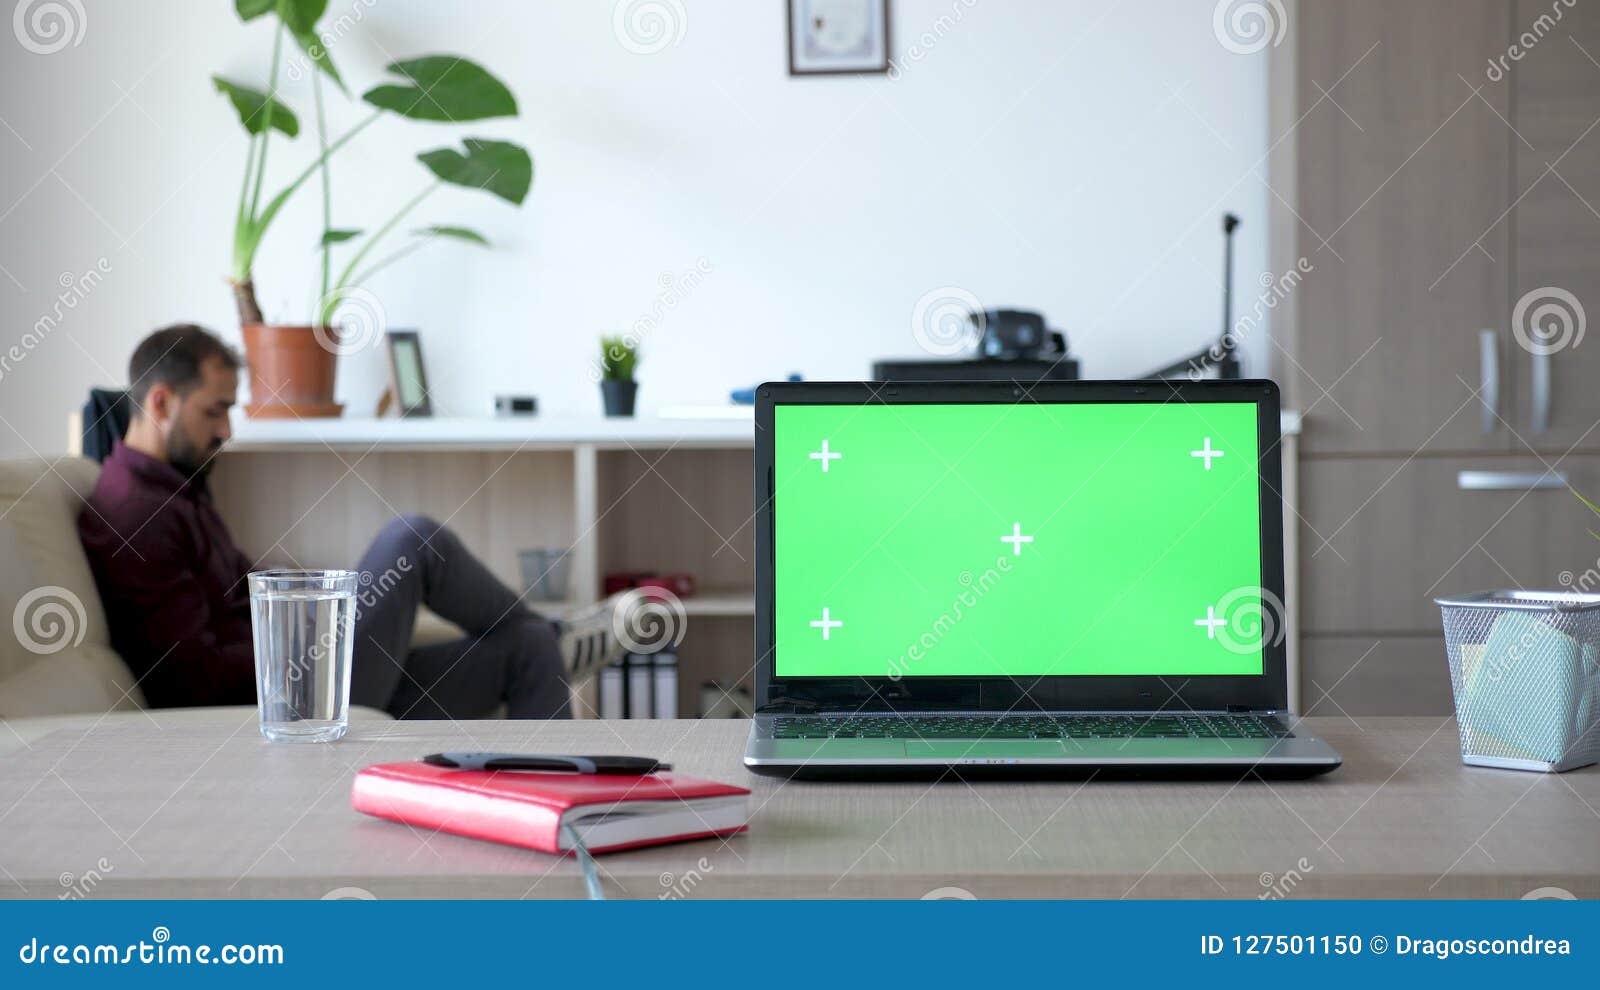 Laptop On The Desk With A Green Screen In The House Stock Footage